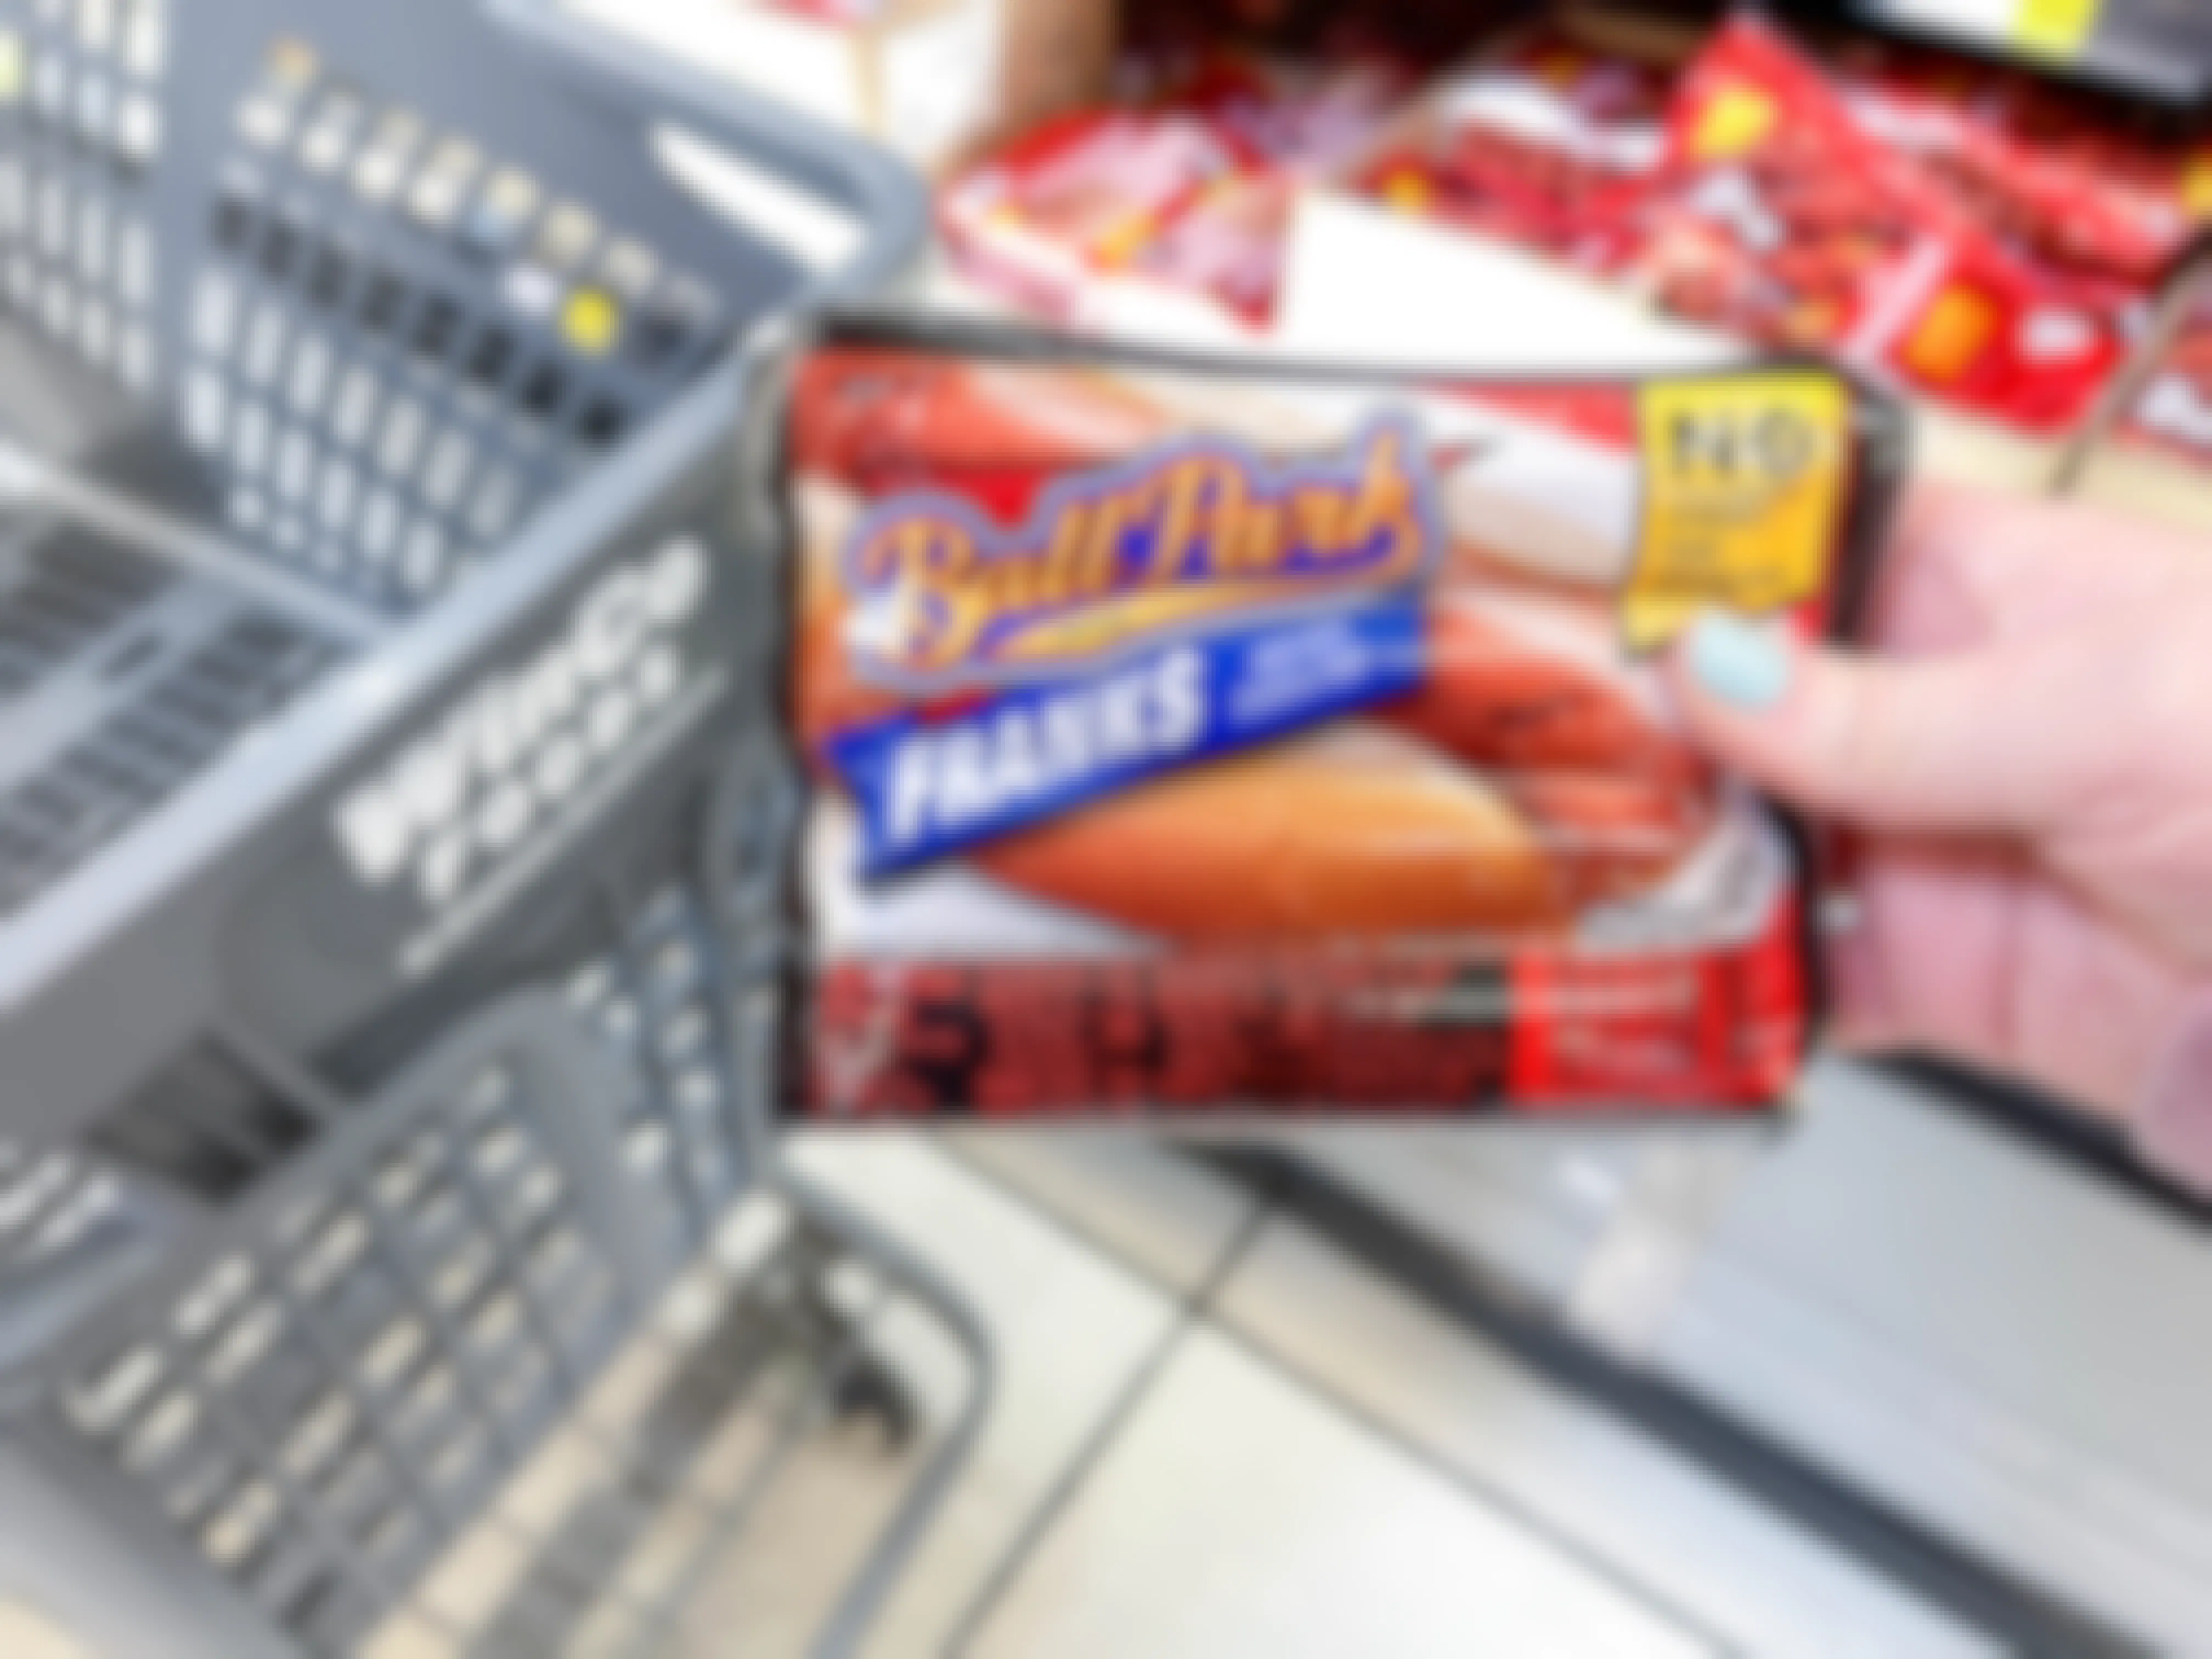 a person holding up ballpark hot dogs in front of cart